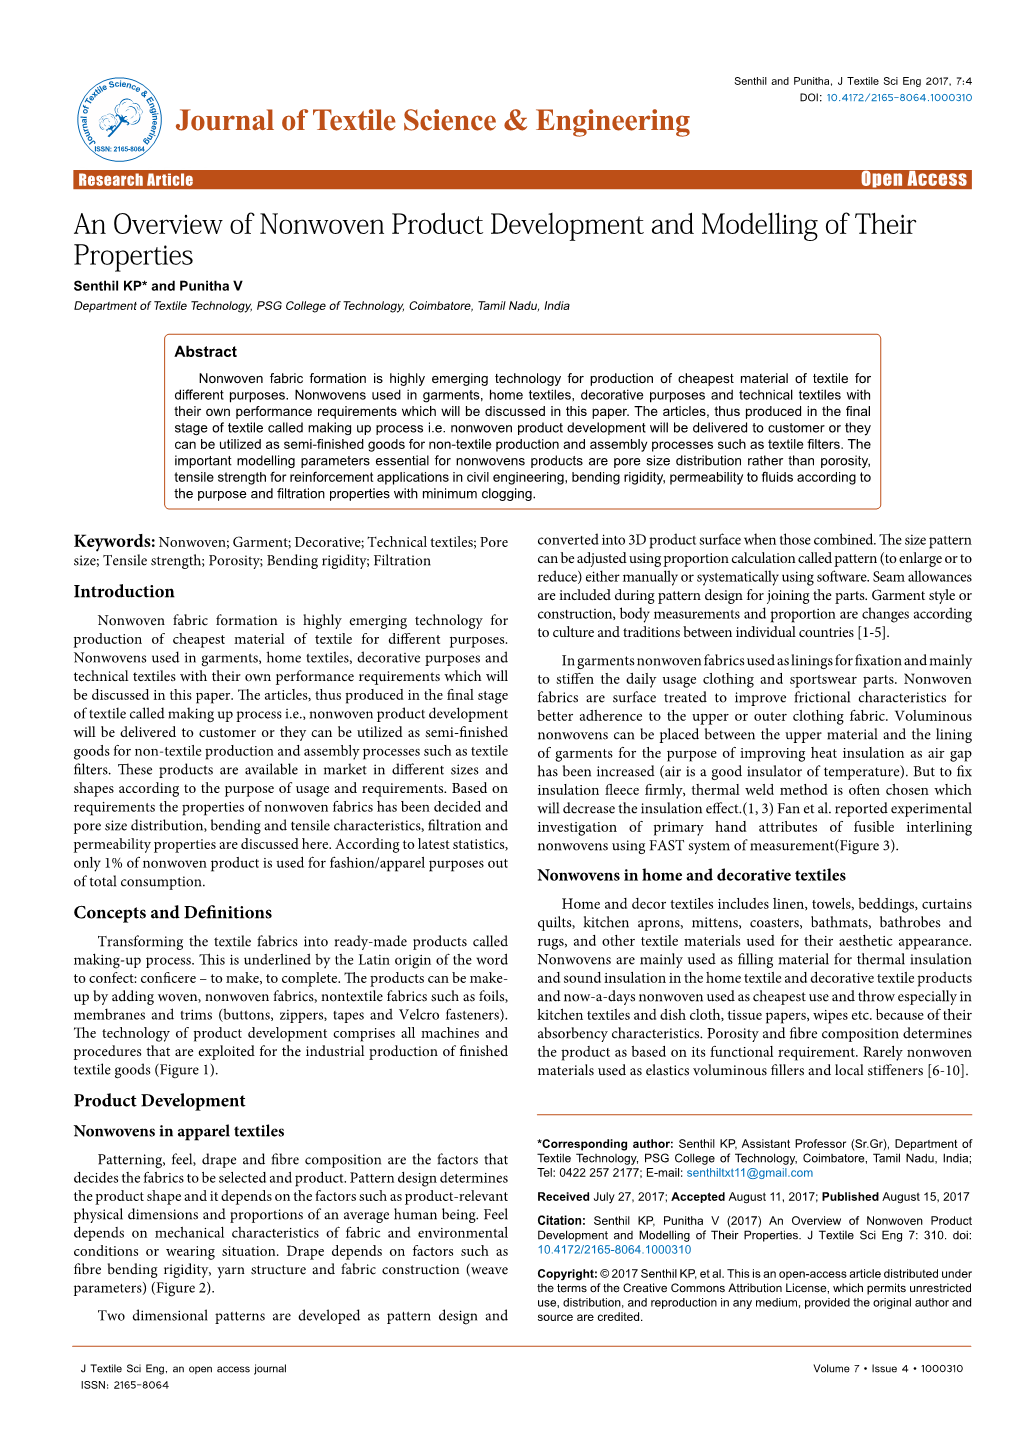 An Overview of Nonwoven Product Development and Modelling Of